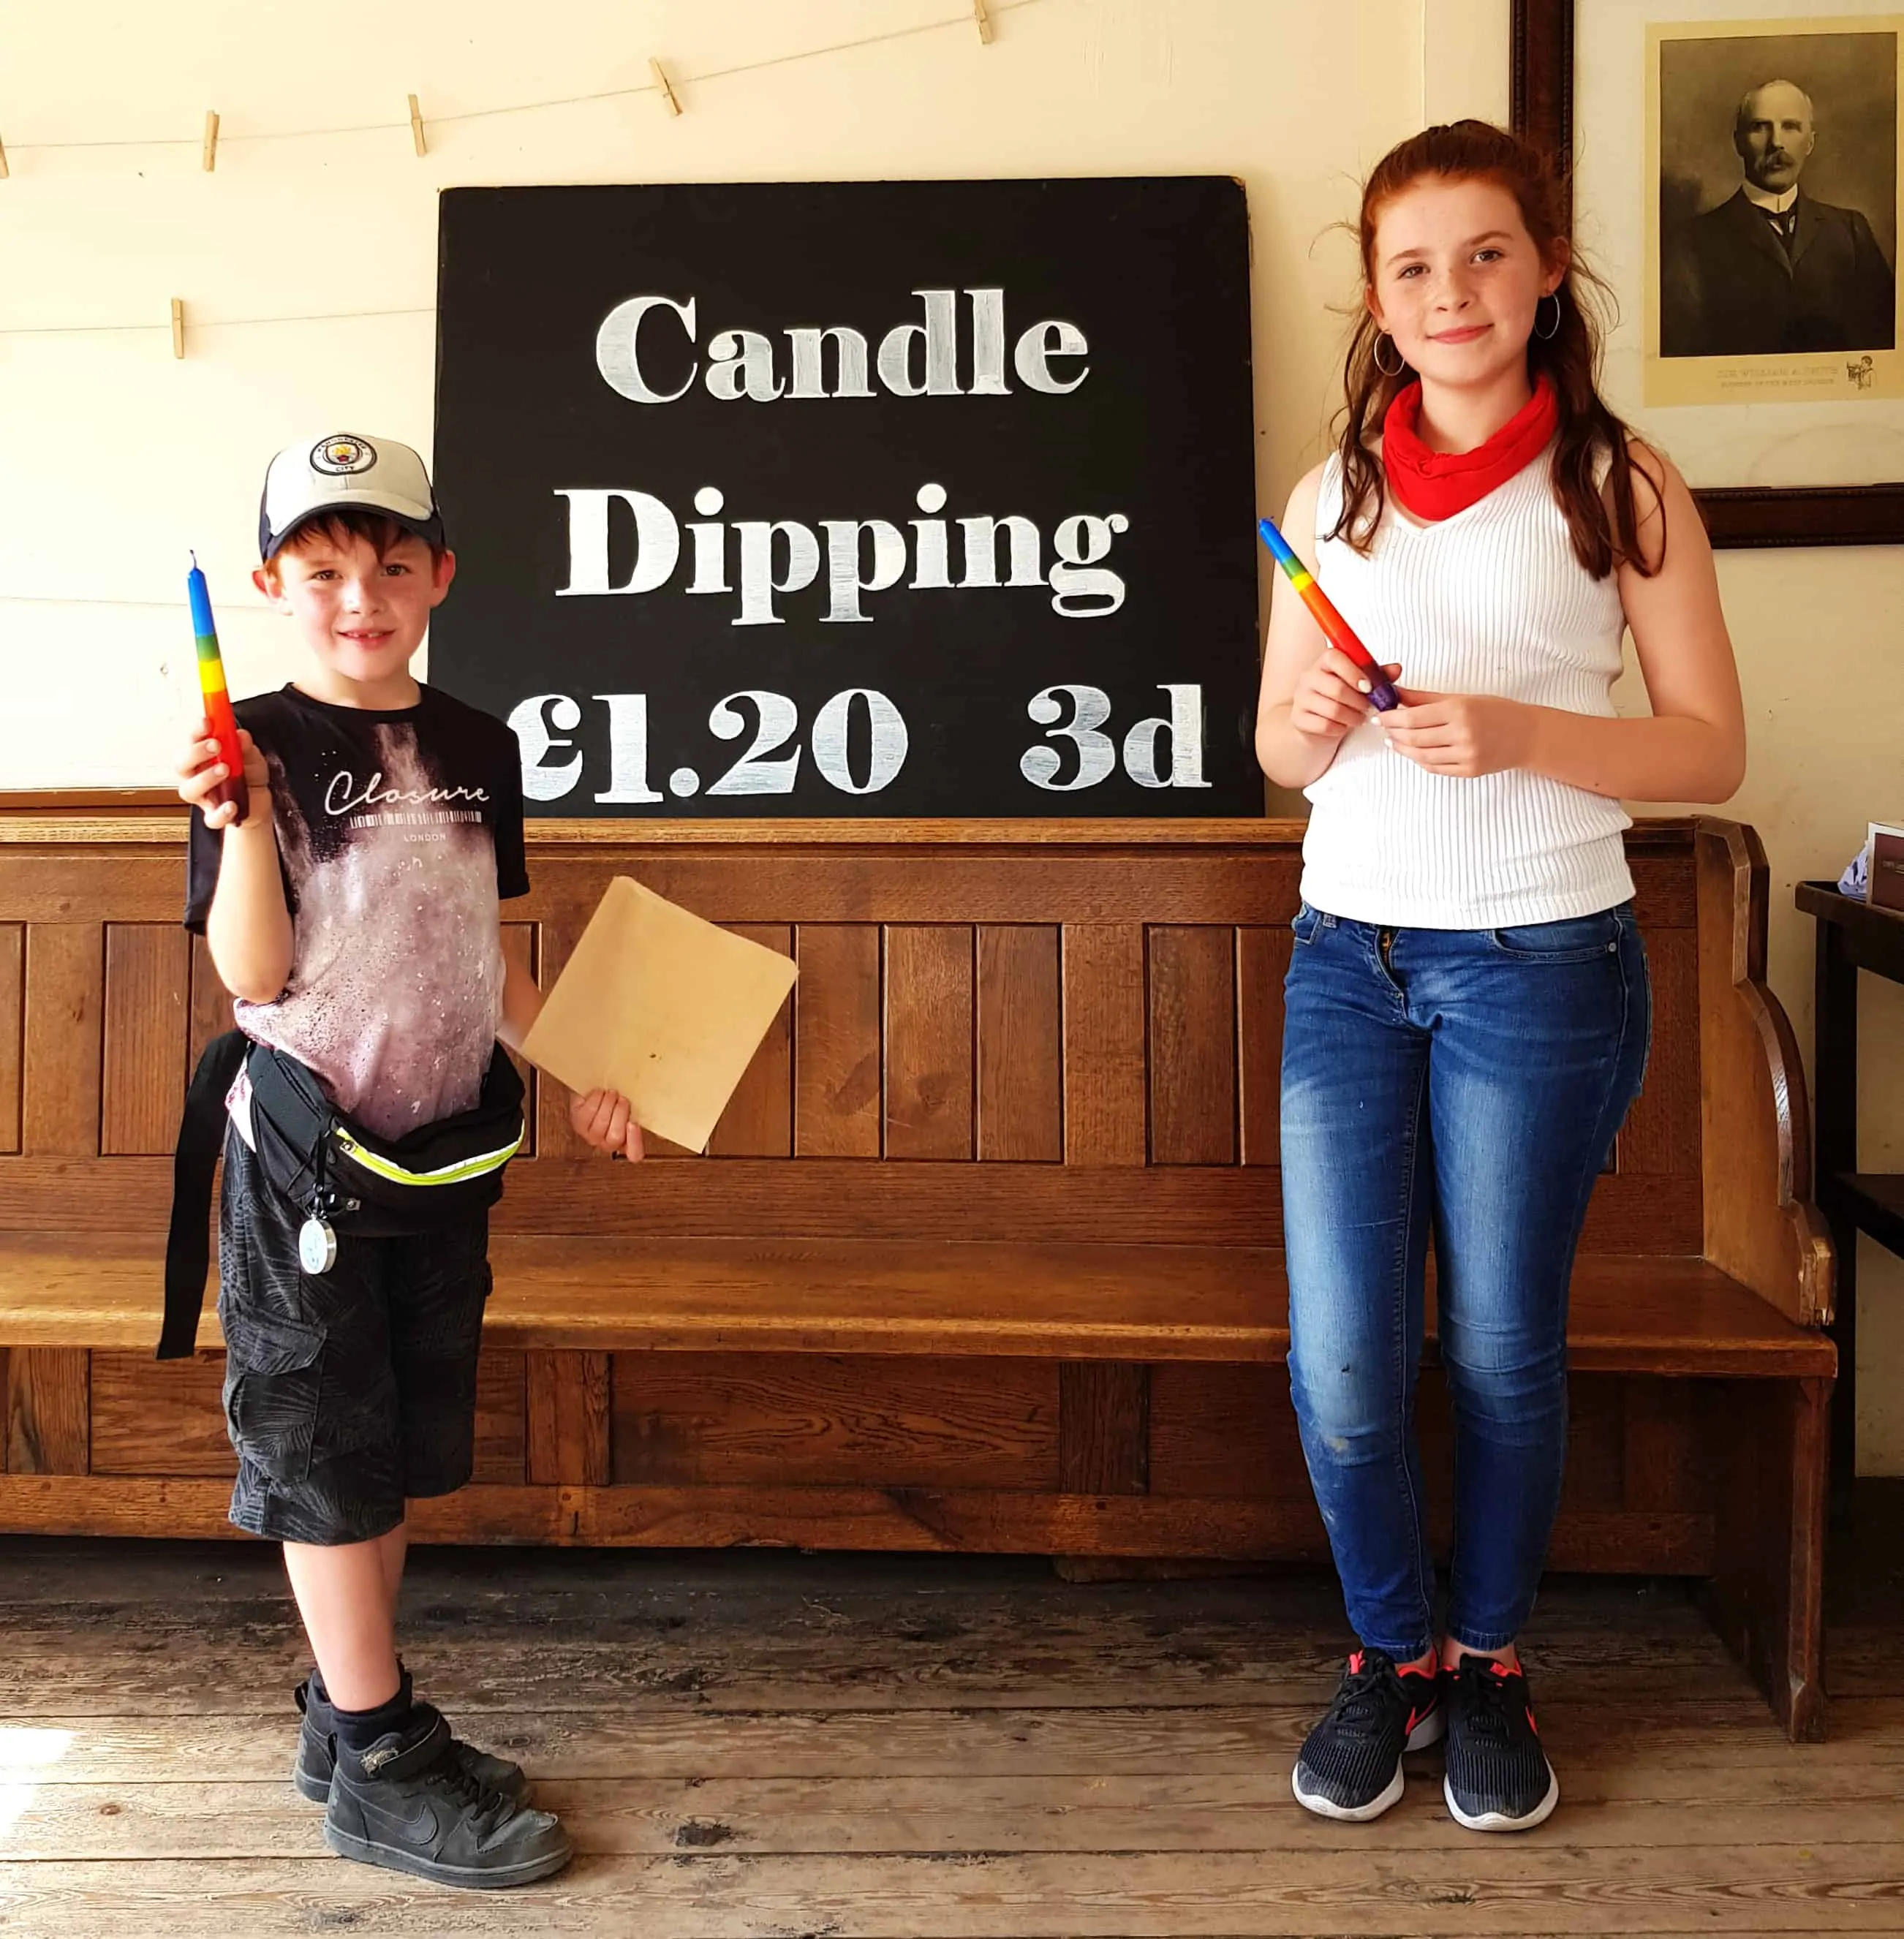 Kids showing their candles after candle dipping